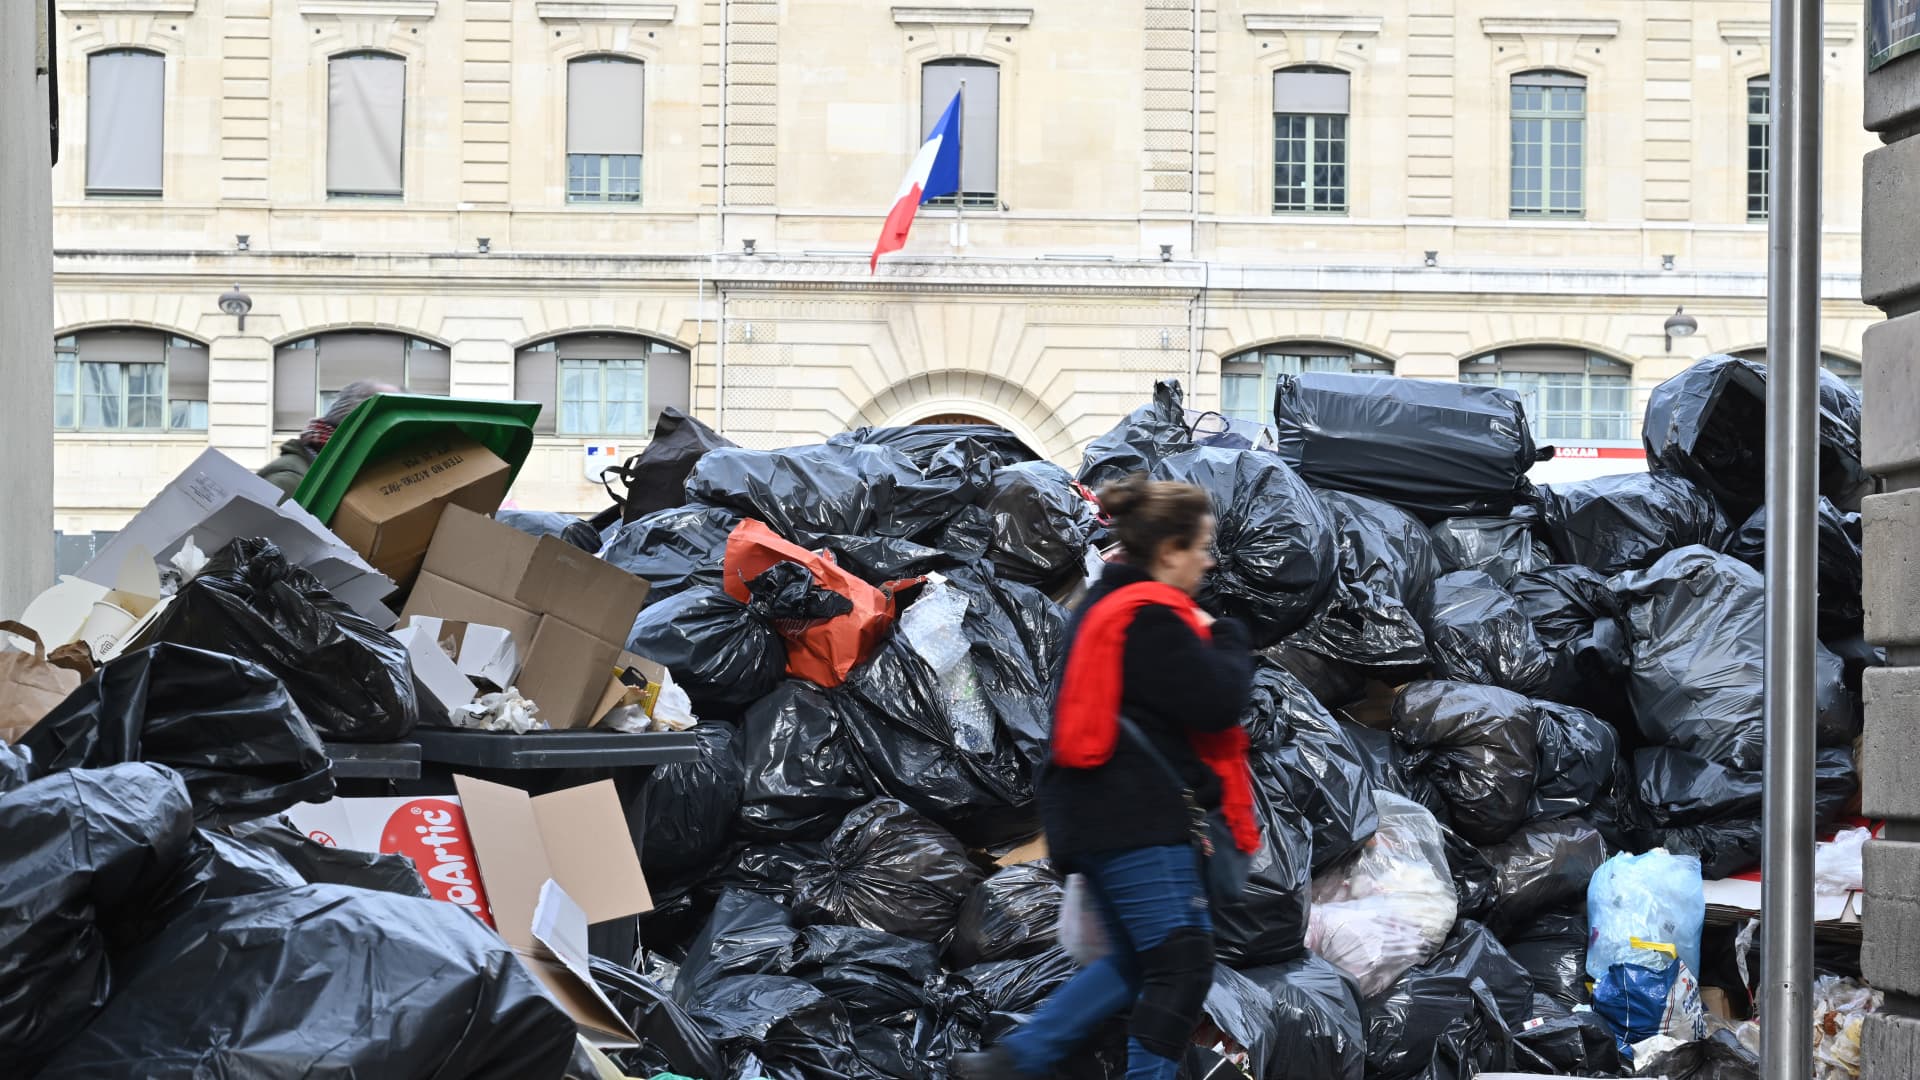 Garbage cans overflowing with trash on the streets as collectors go on strike in Paris, France on March 20, 2023. Garbage collectors have joined the massive strikes throughout France against pension reform plans.